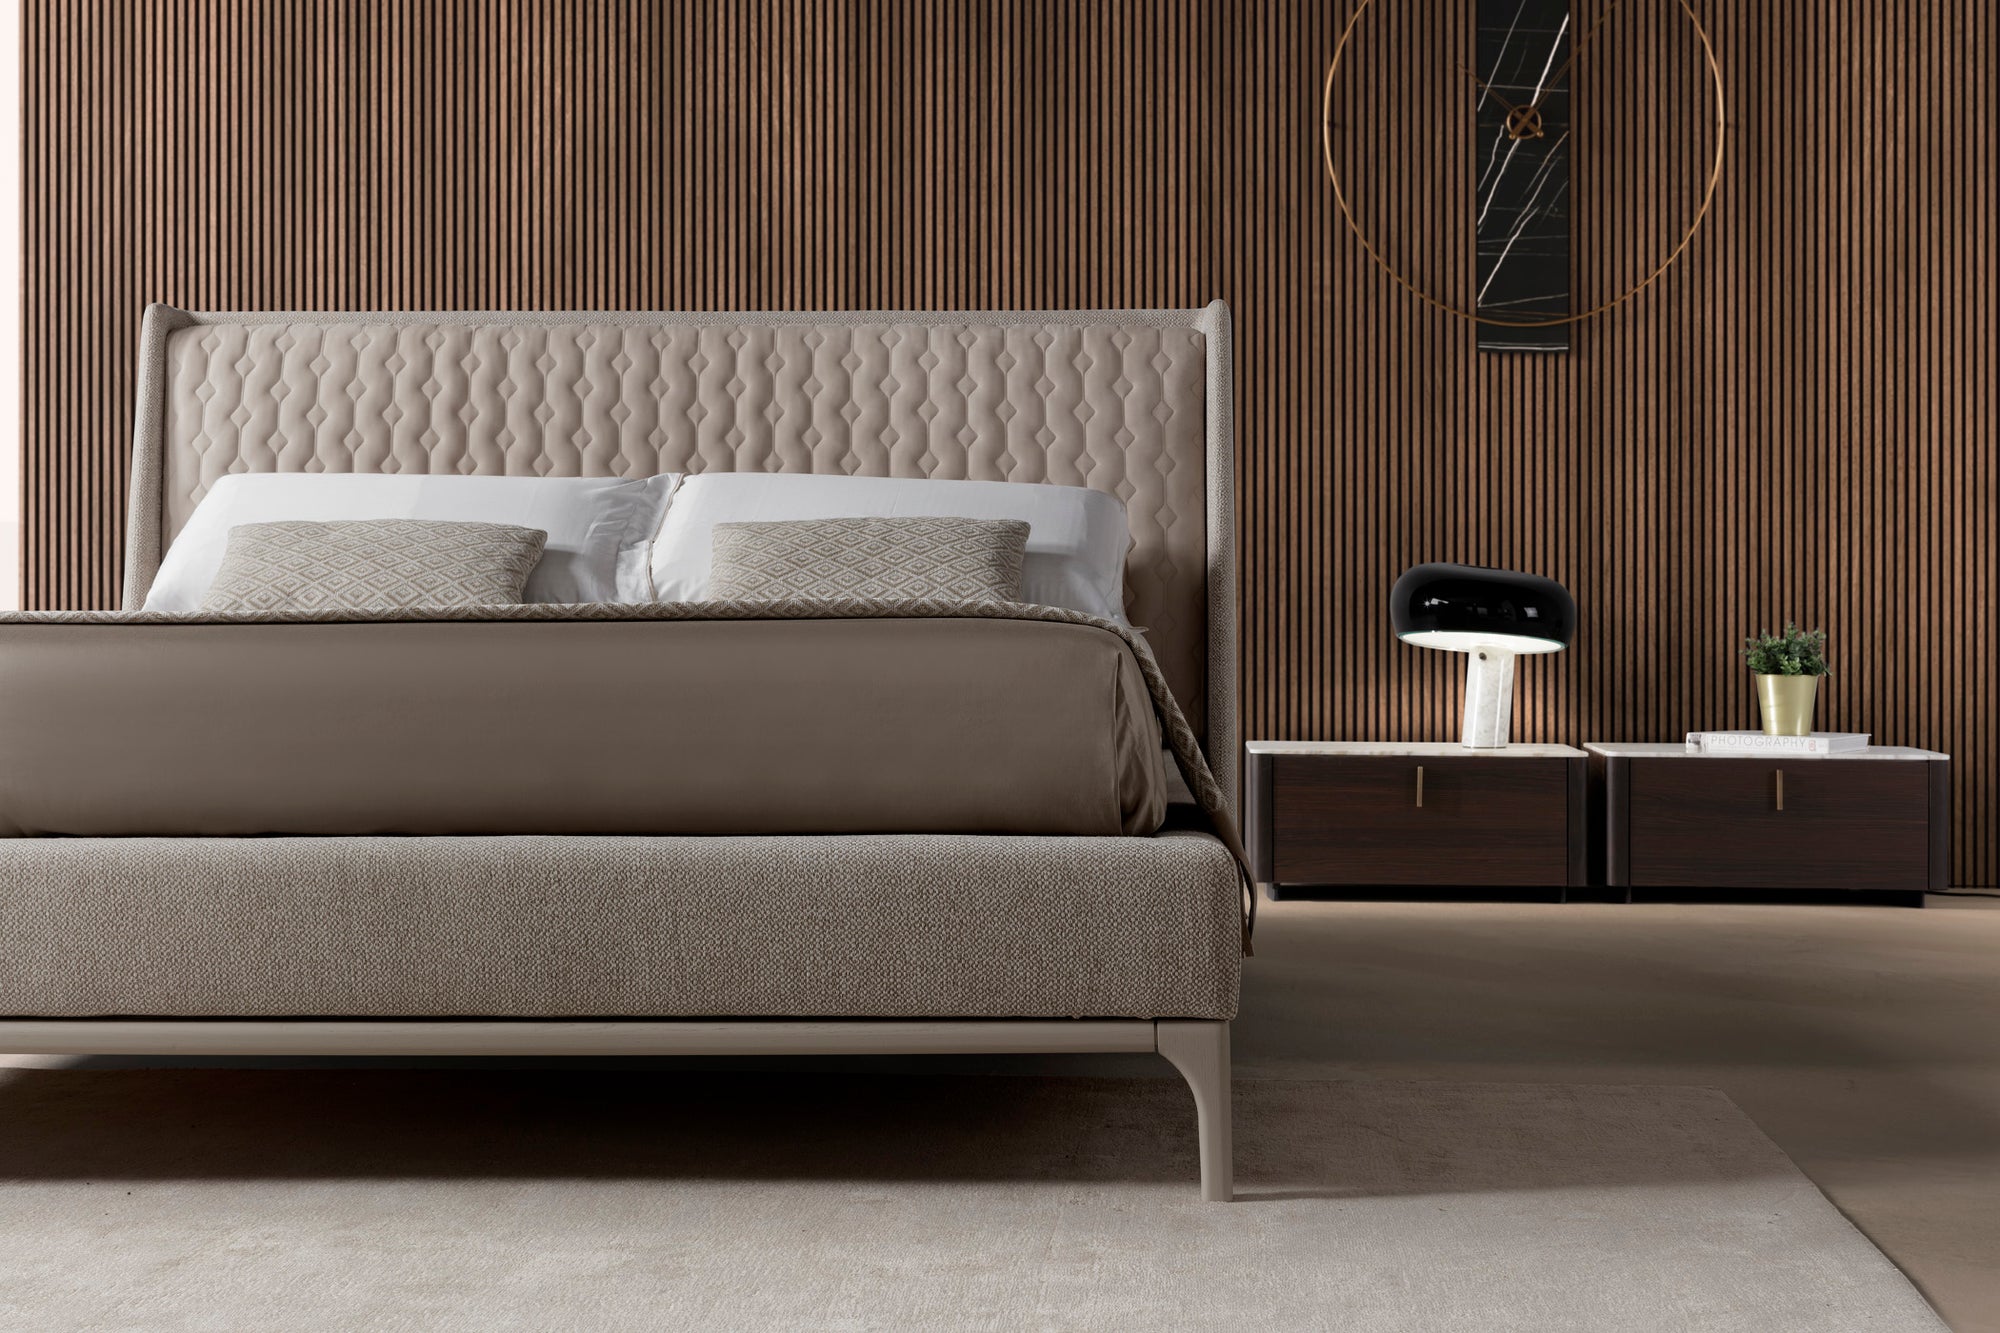 Terence Lux bed - Conte